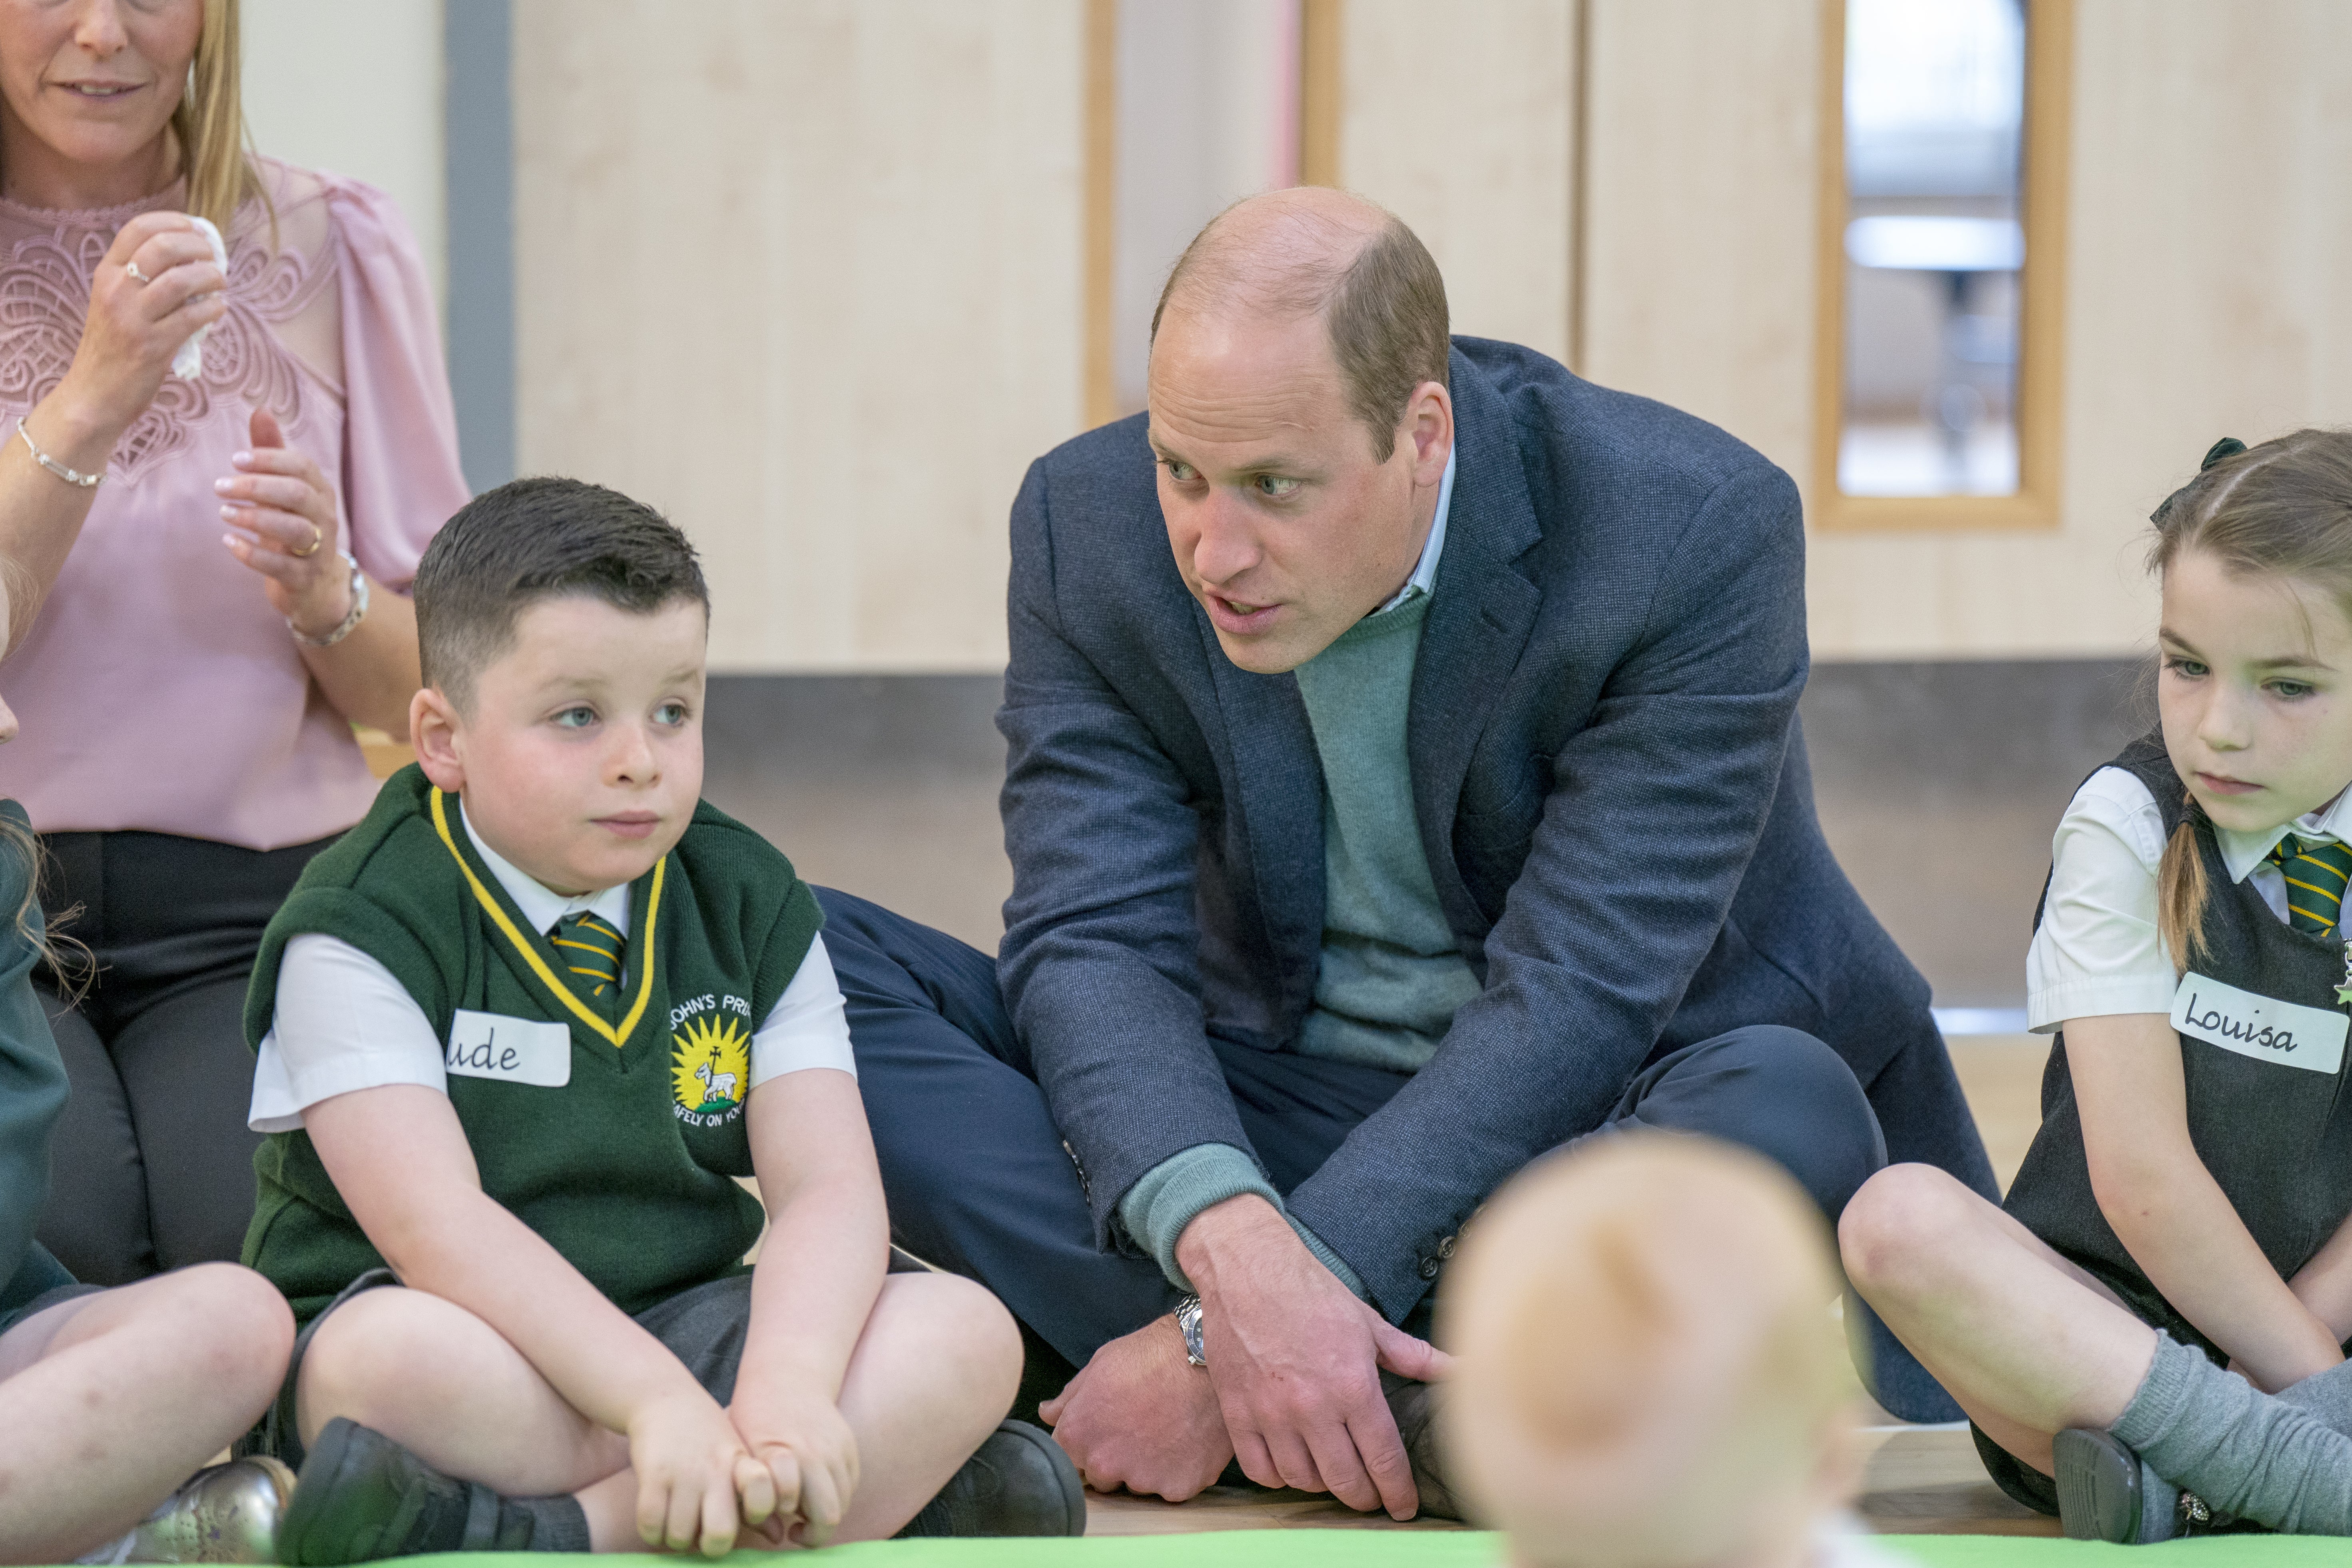 William chats to a little boy during the visit to the primary school (Jane Barlow/PA)